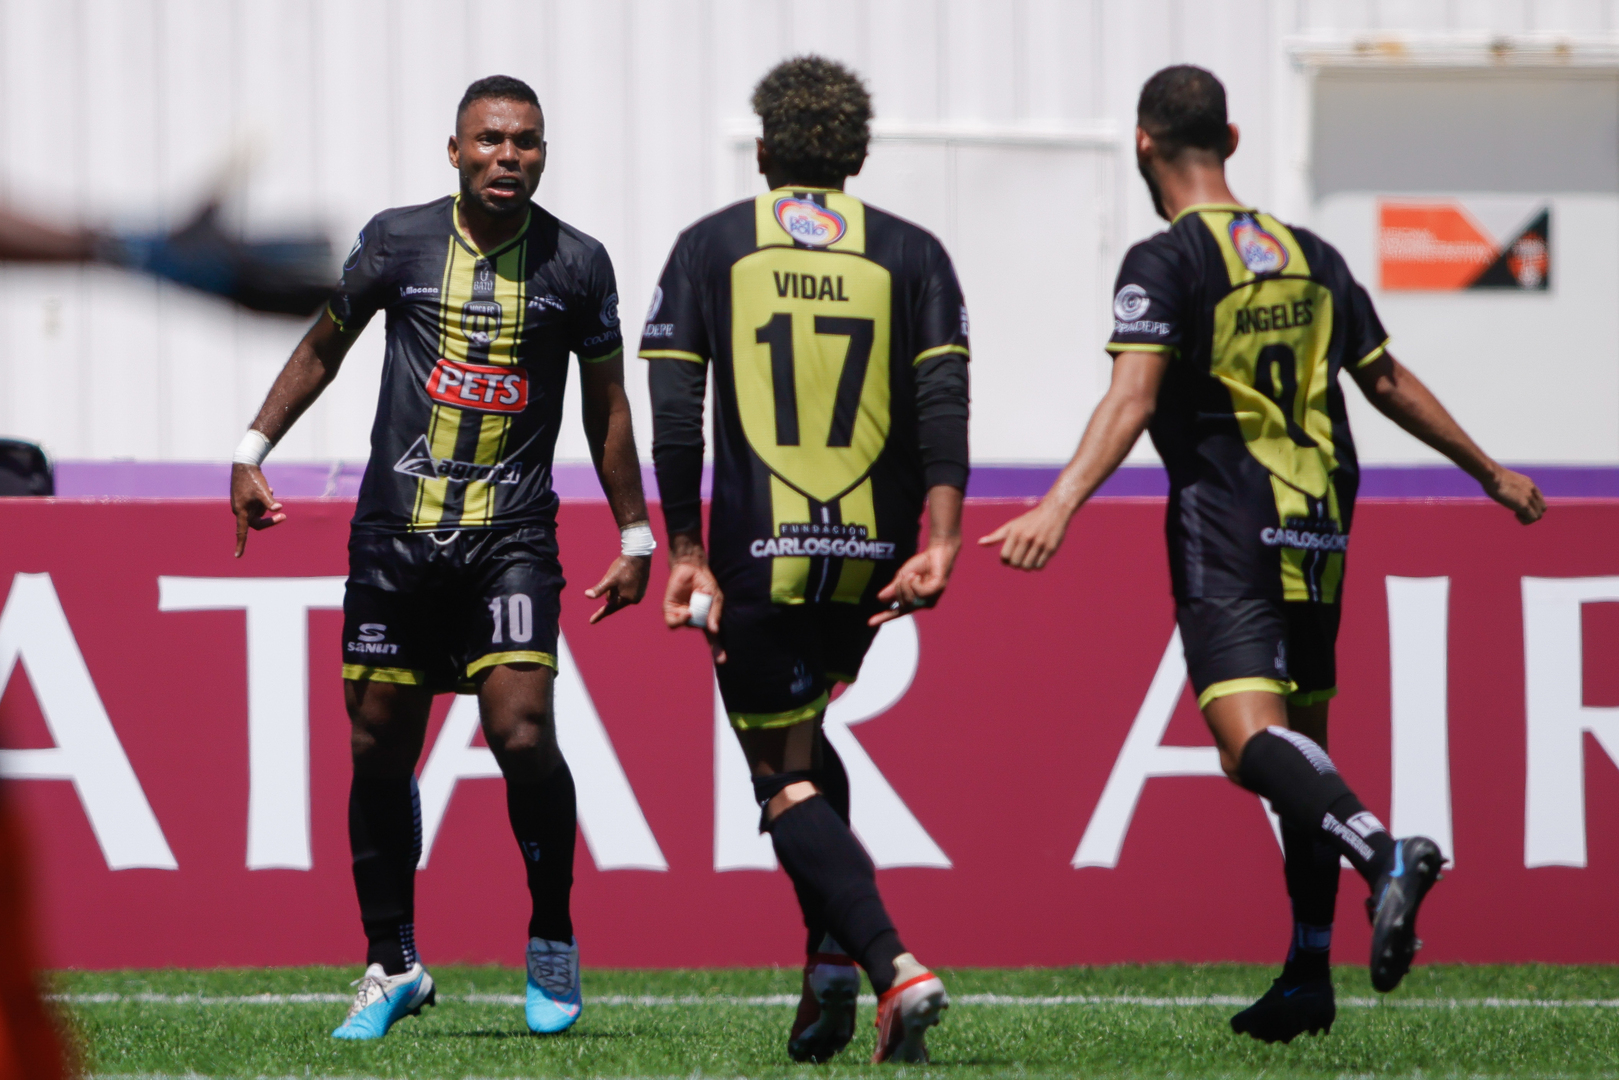 SCCL resumes with quarterfinal clash between Union and Atlas